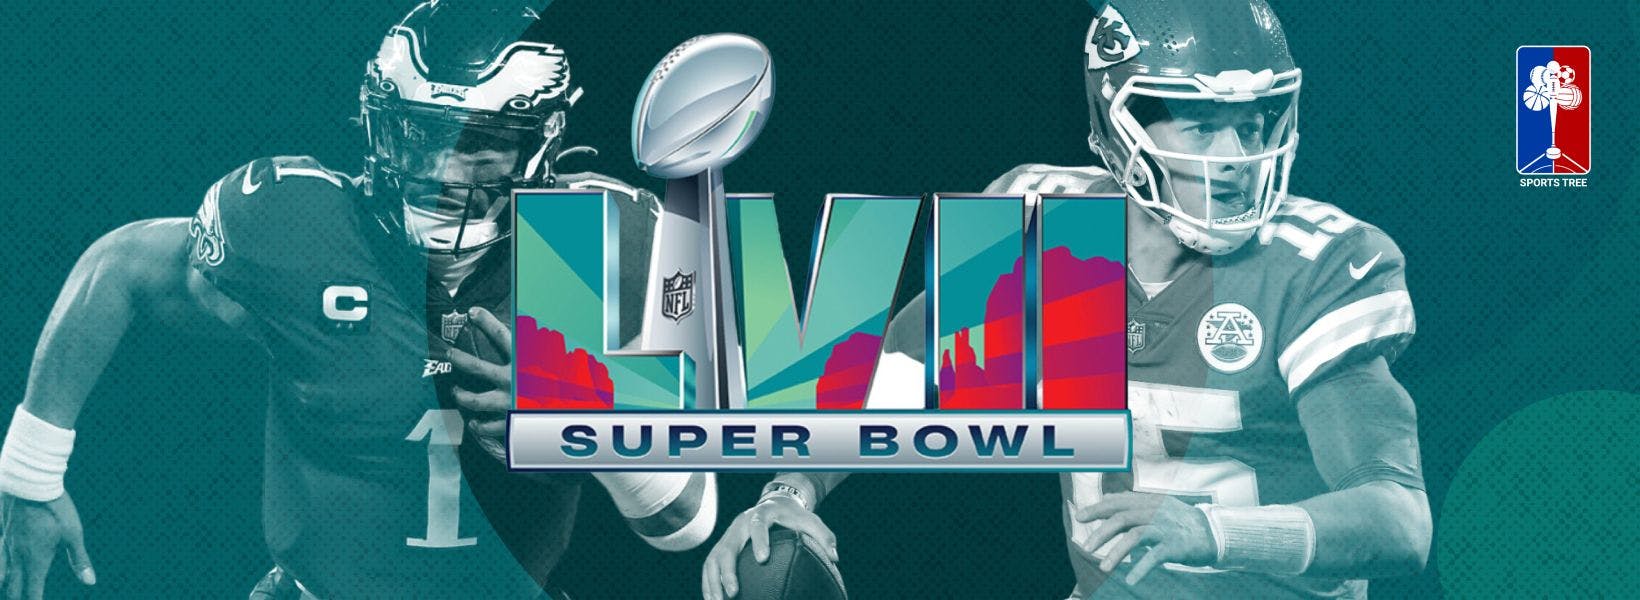 Super Bowl LVII Preview- A look ahead to Sunday's matchup between the Chiefs and Eagles